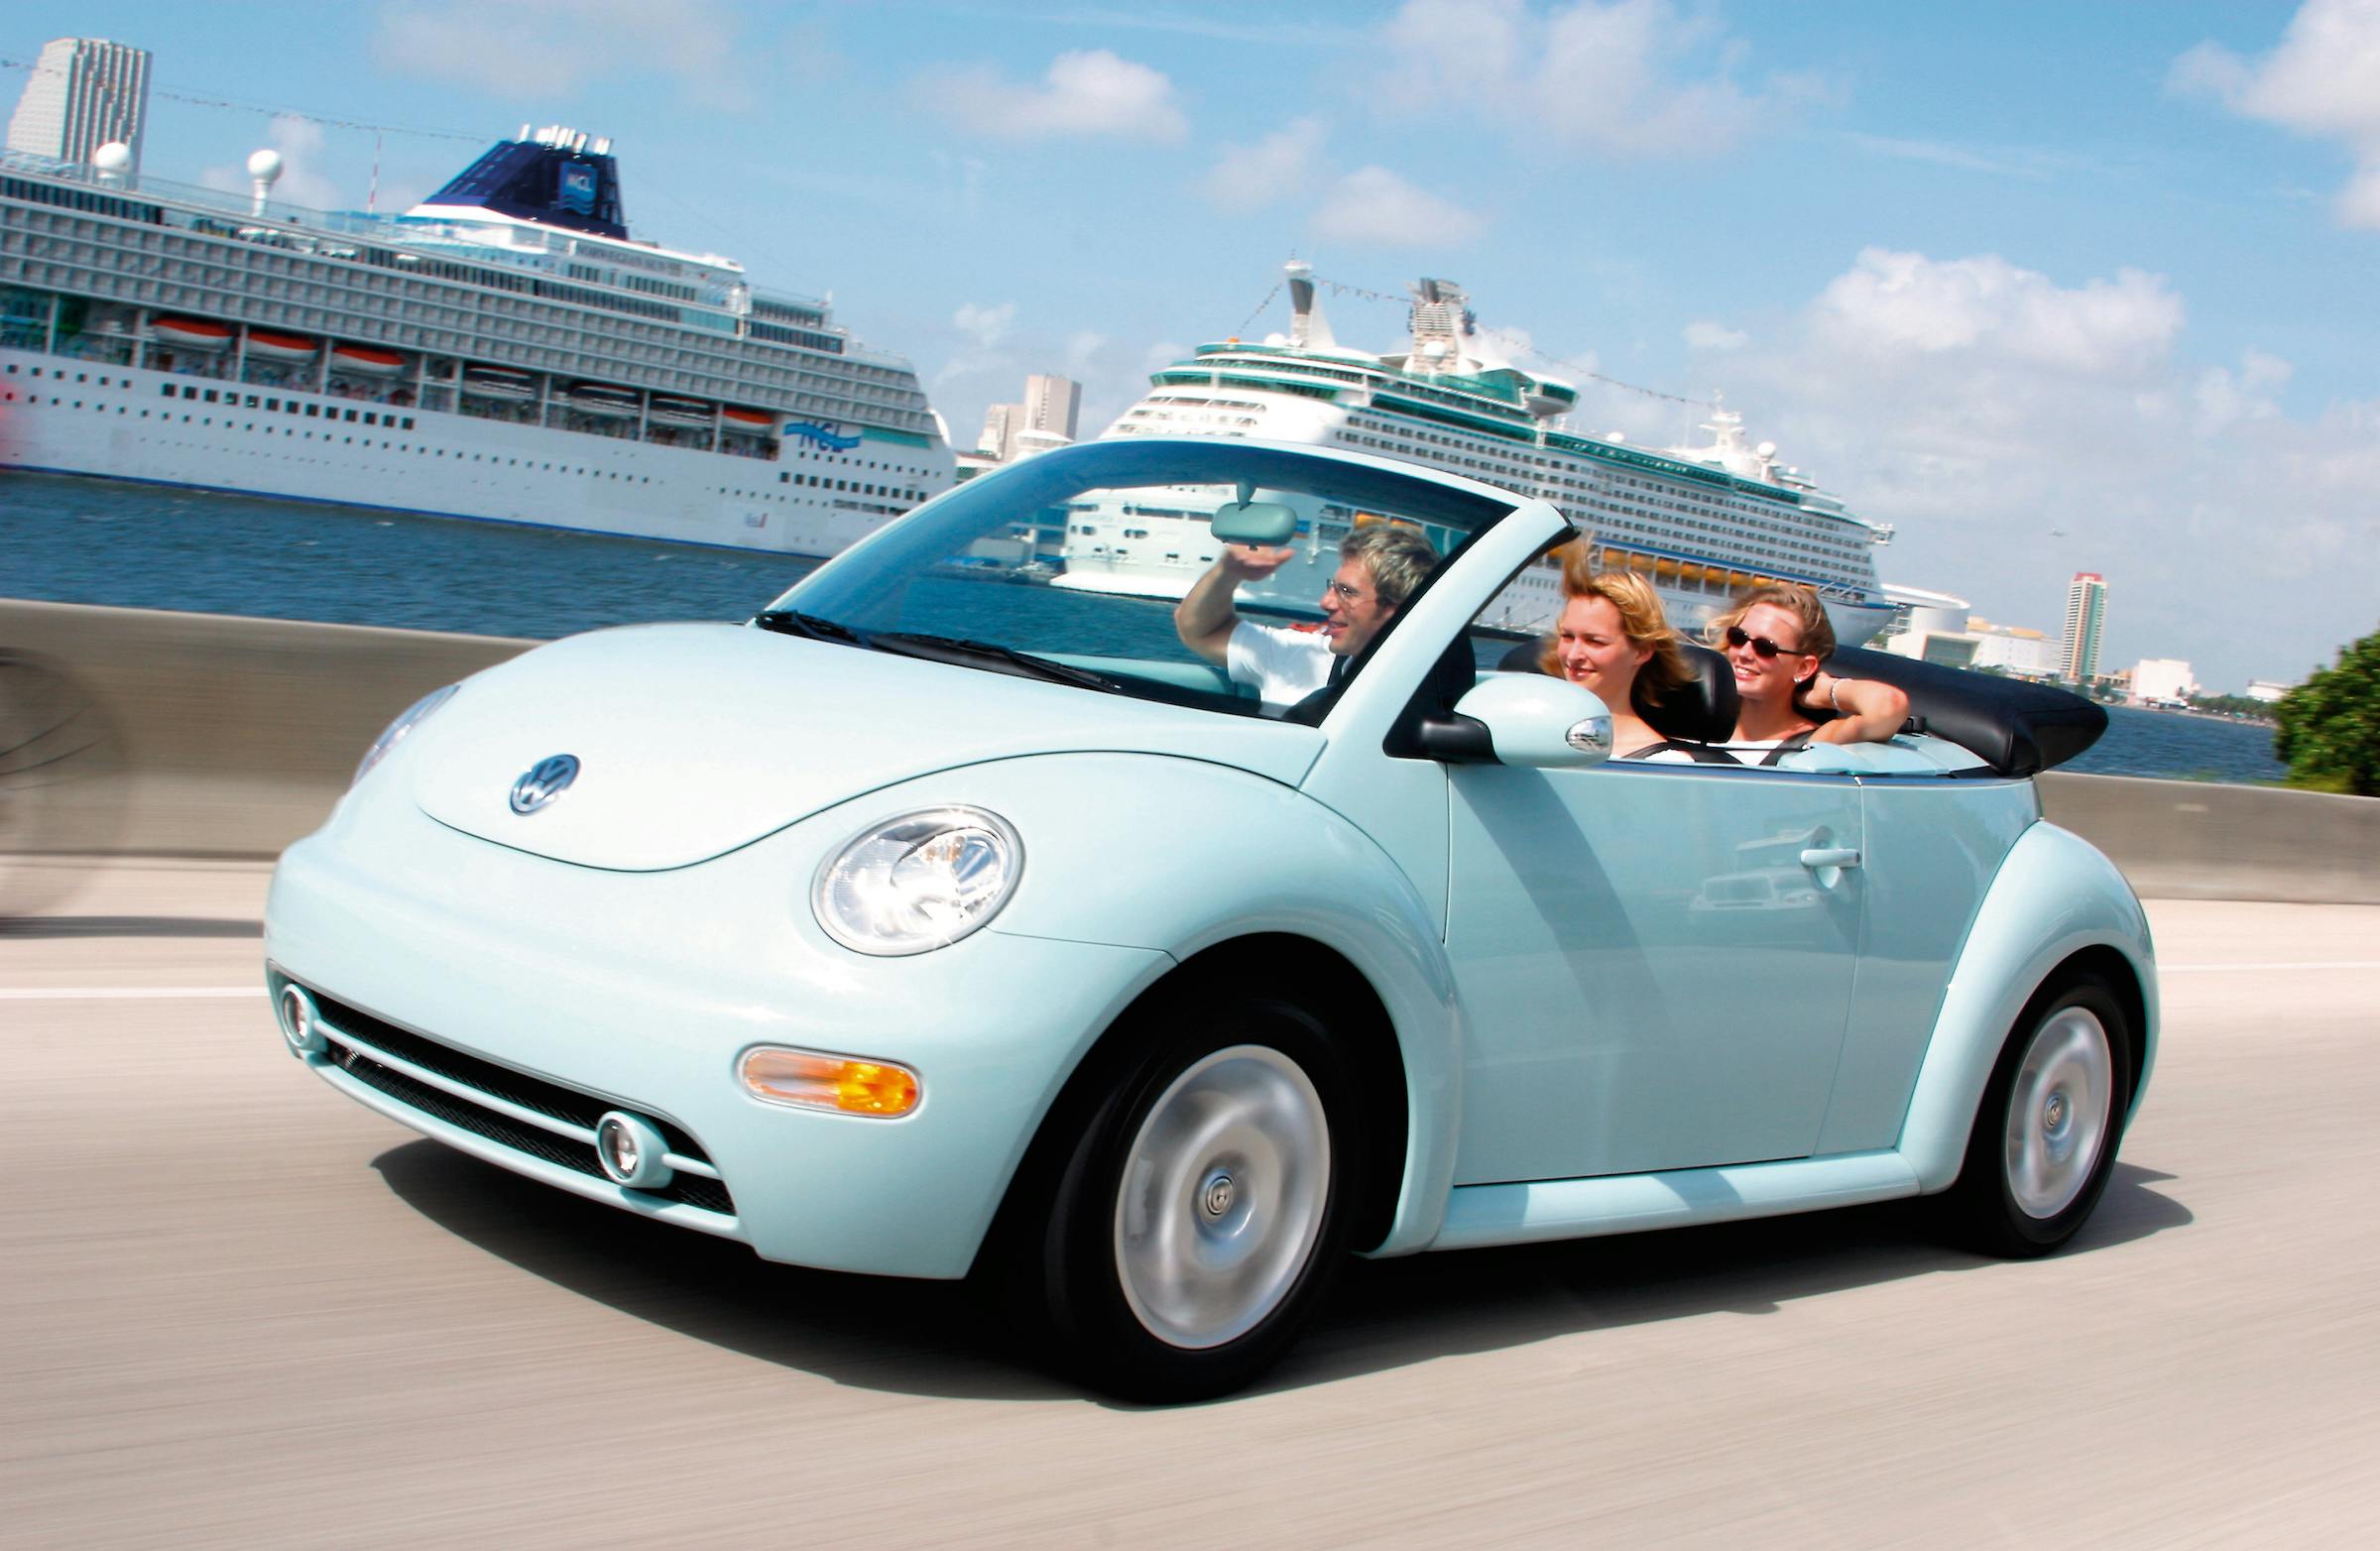 VW Beetle convertible driving action